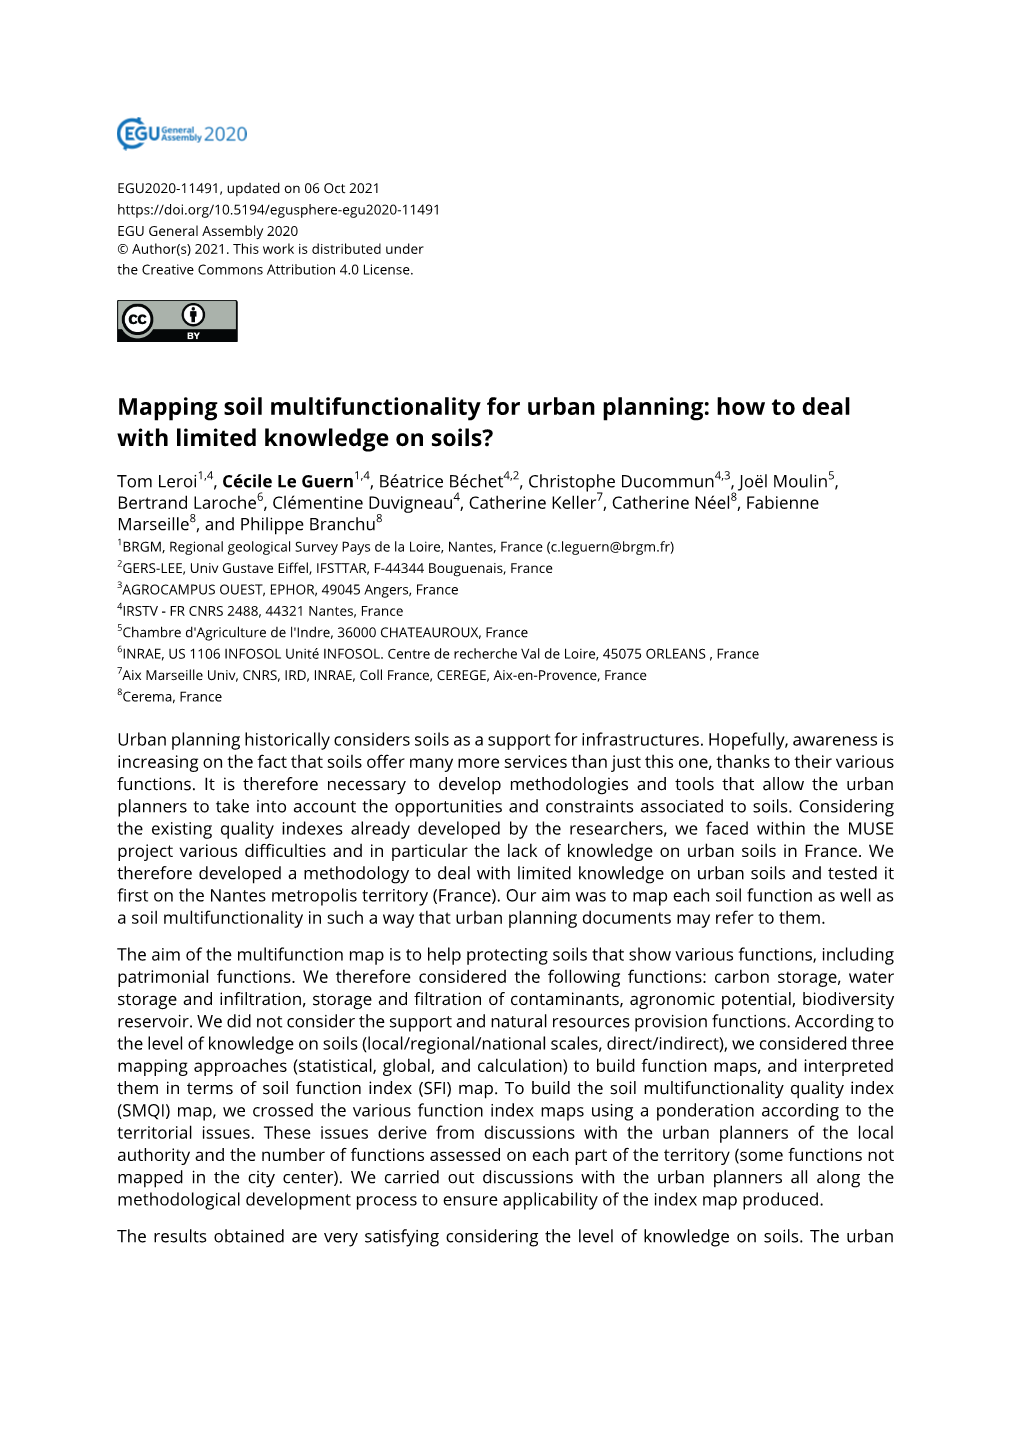 Mapping Soil Multifunctionality for Urban Planning: How to Deal with Limited Knowledge on Soils?